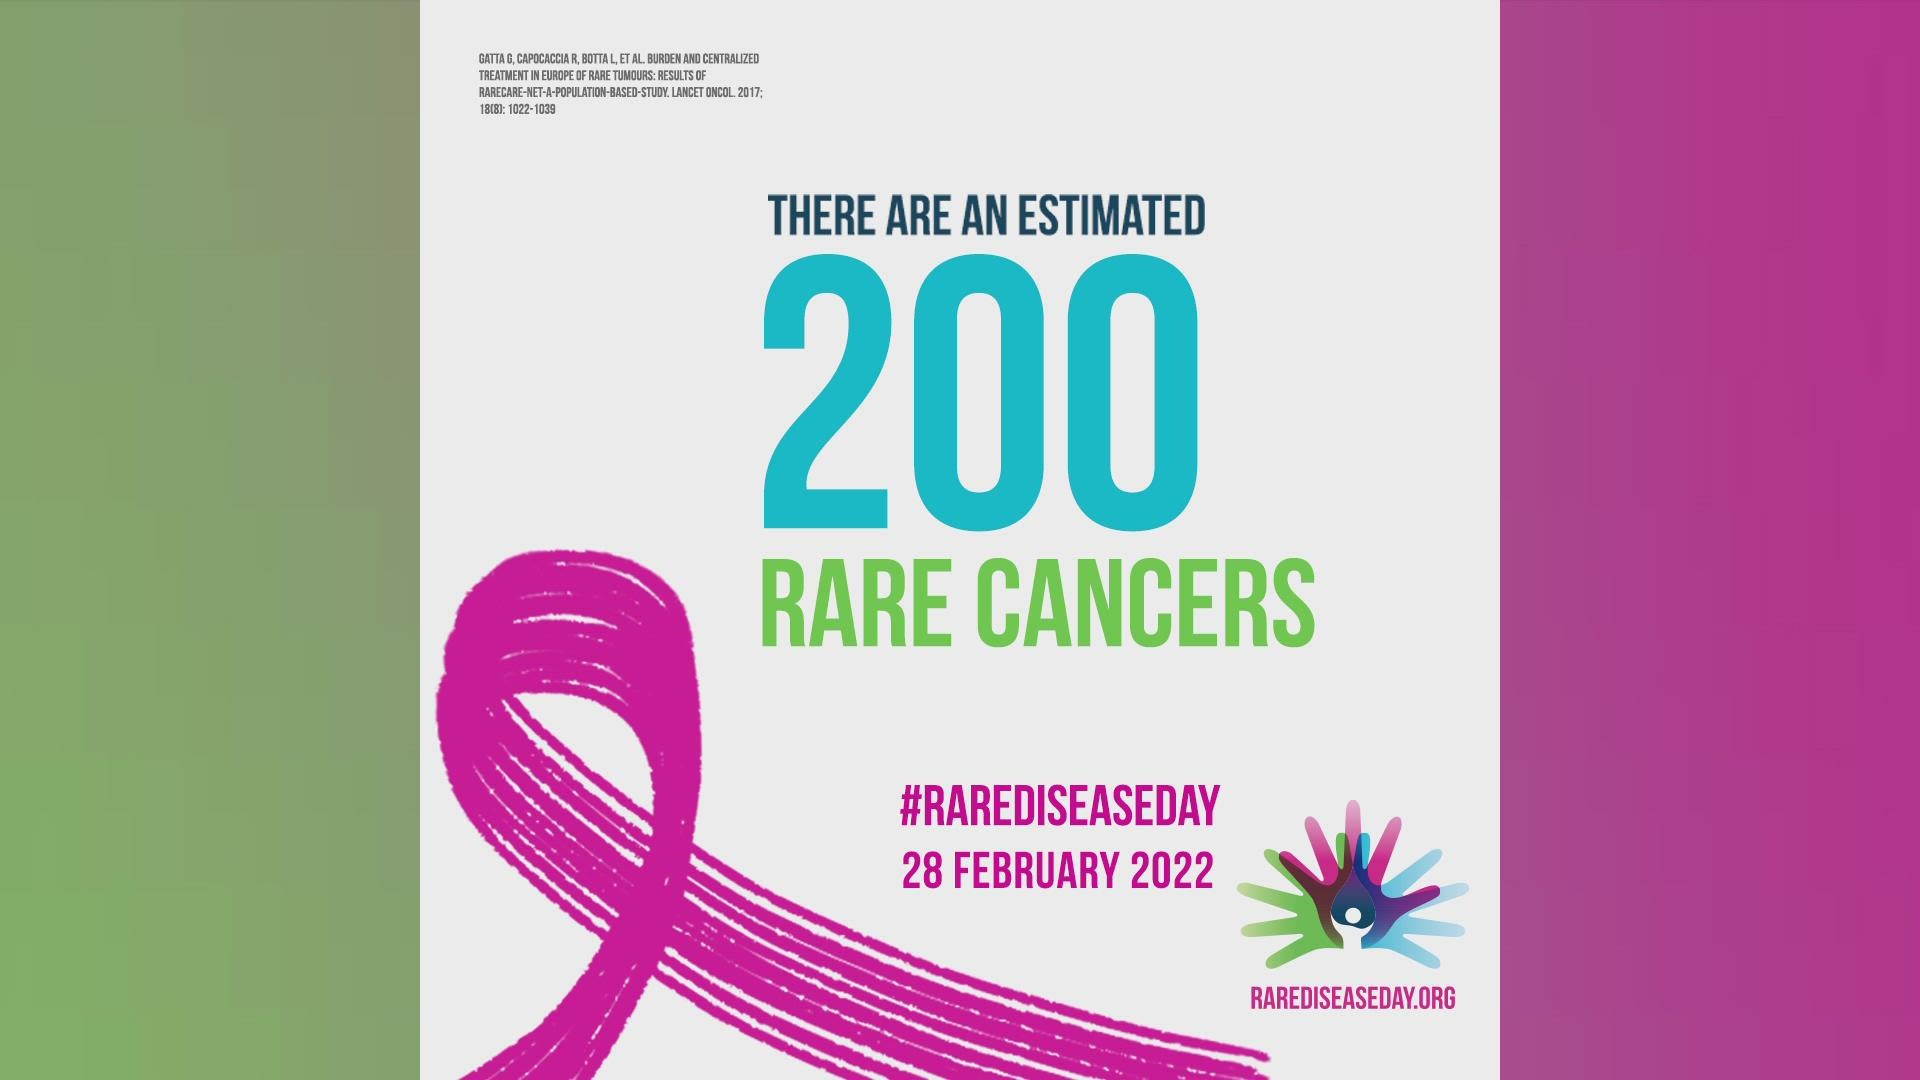 Rare Disease Day is Monday, Feb. 28 and recognizes about 7,000 rare diseases.